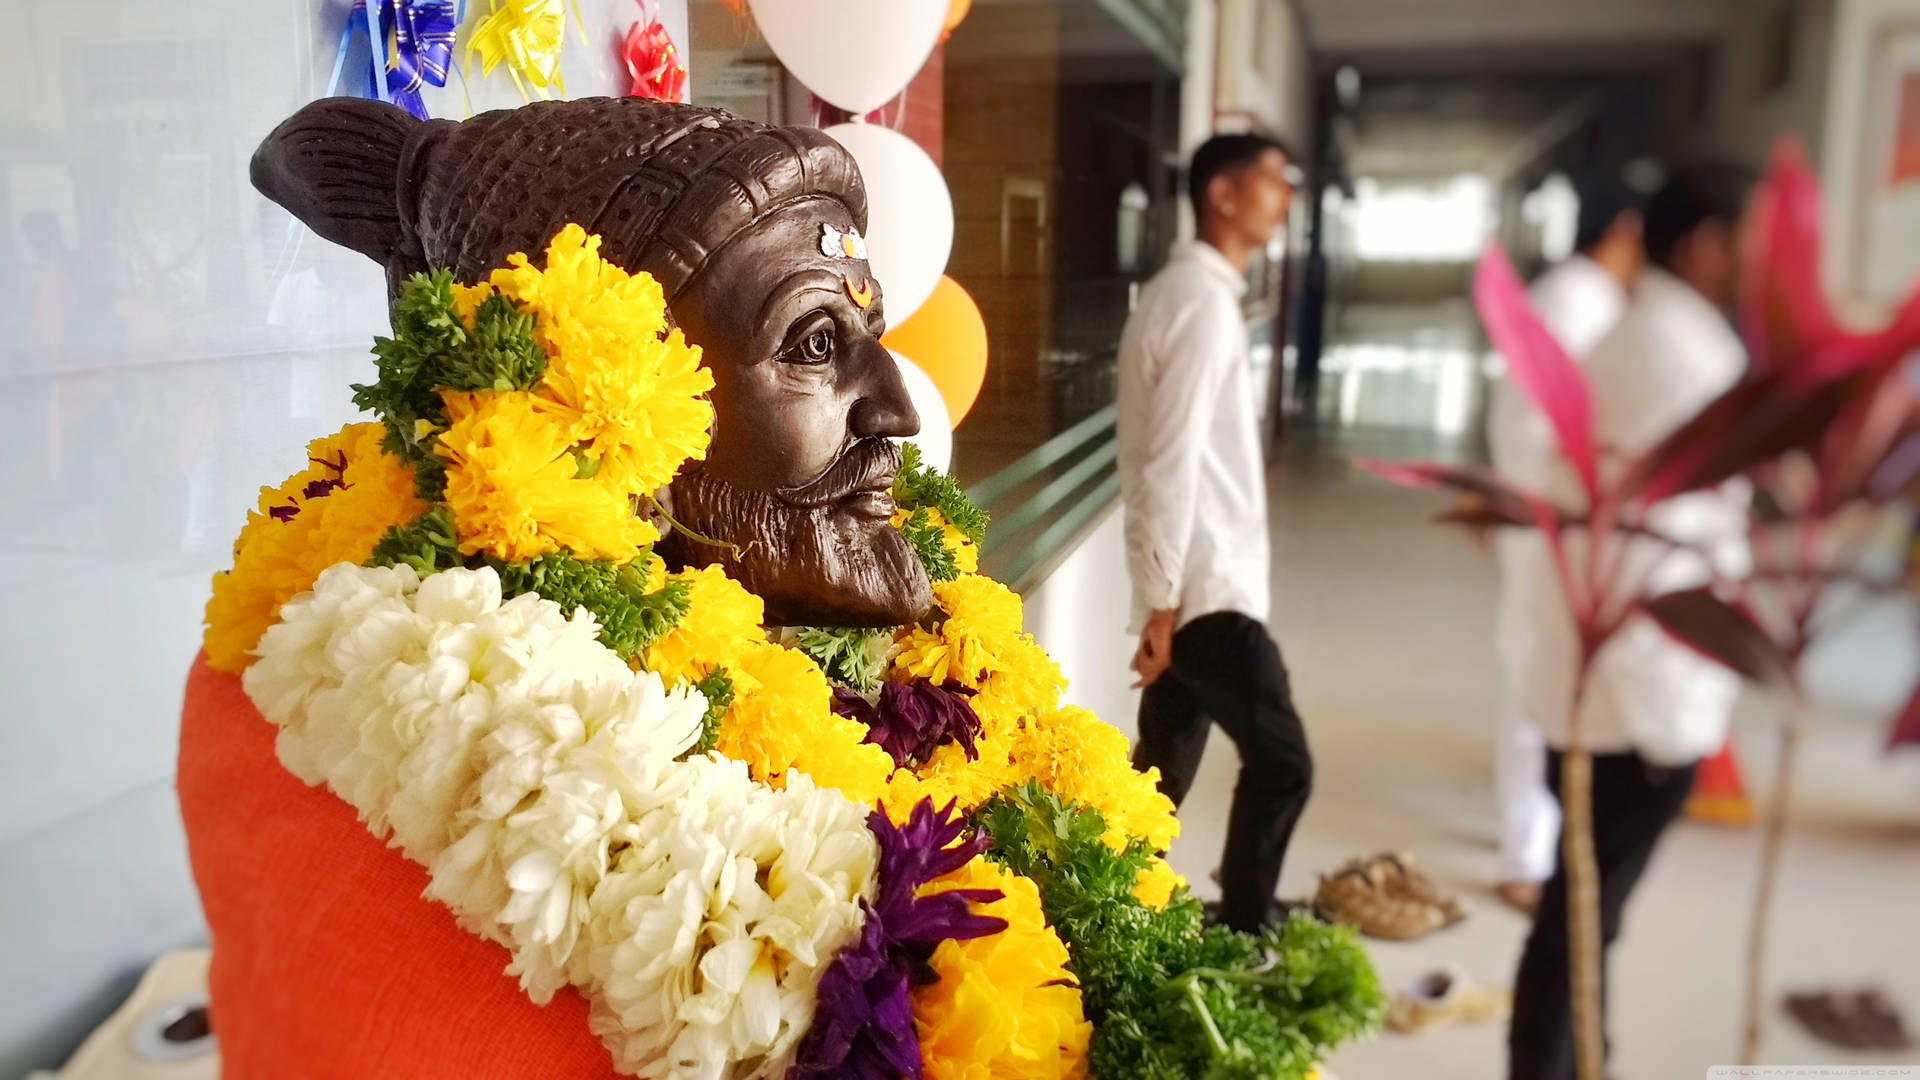 Shivaji Maharaj Statue With Flowers And Garlands Hd Background